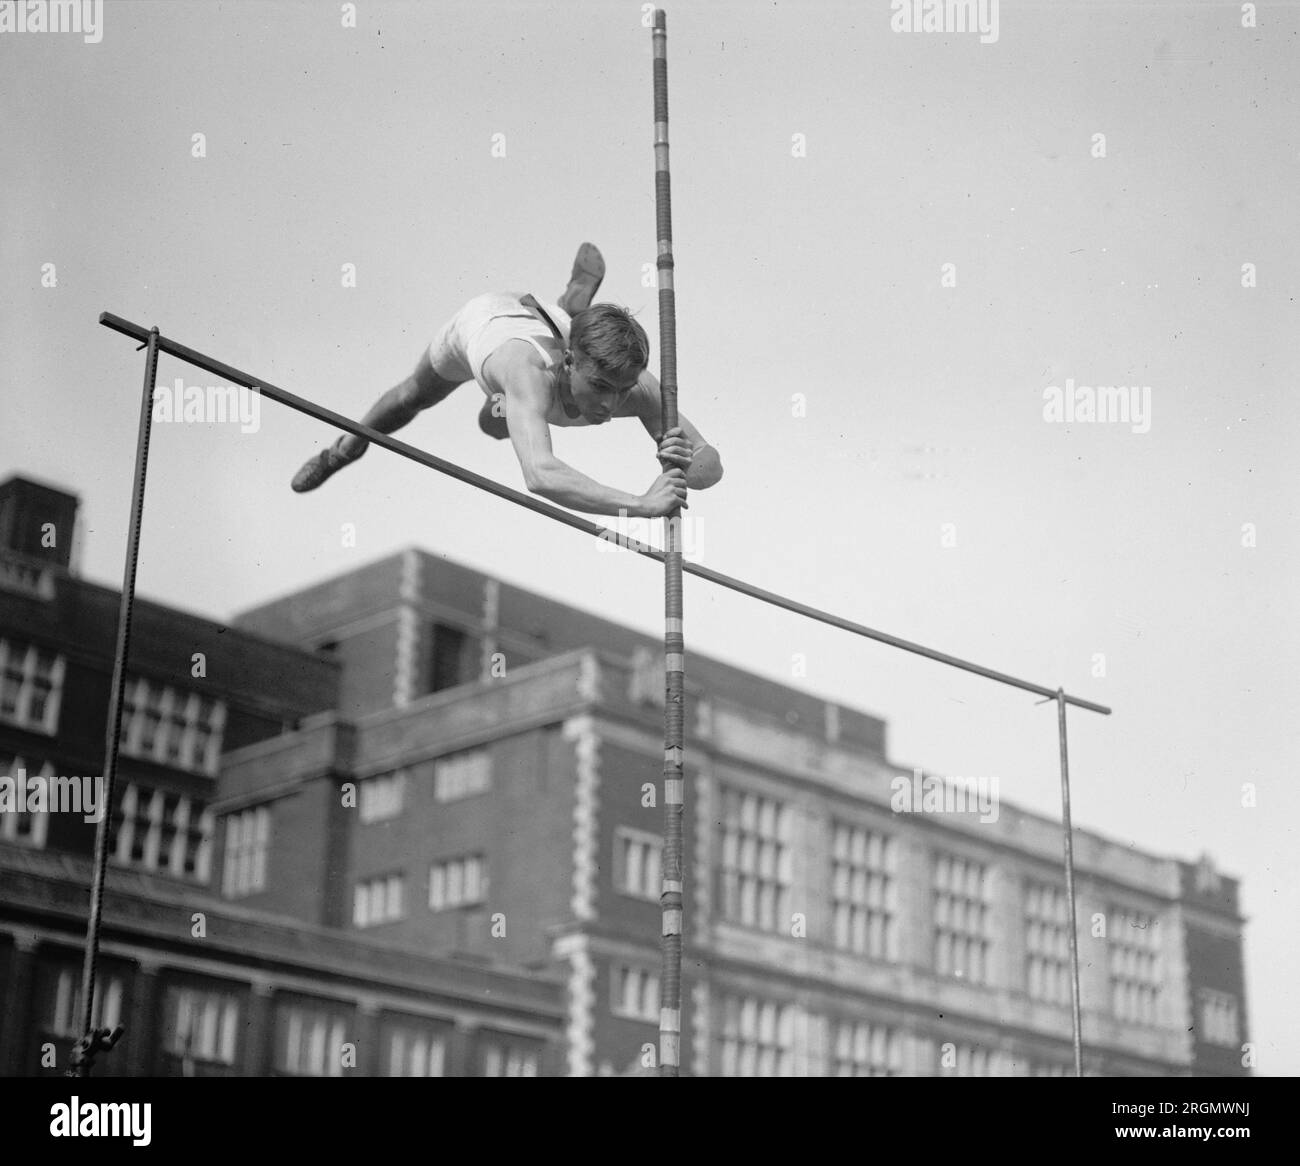 Vintage high jumper clearing a bar ca. 1923 Stock Photo